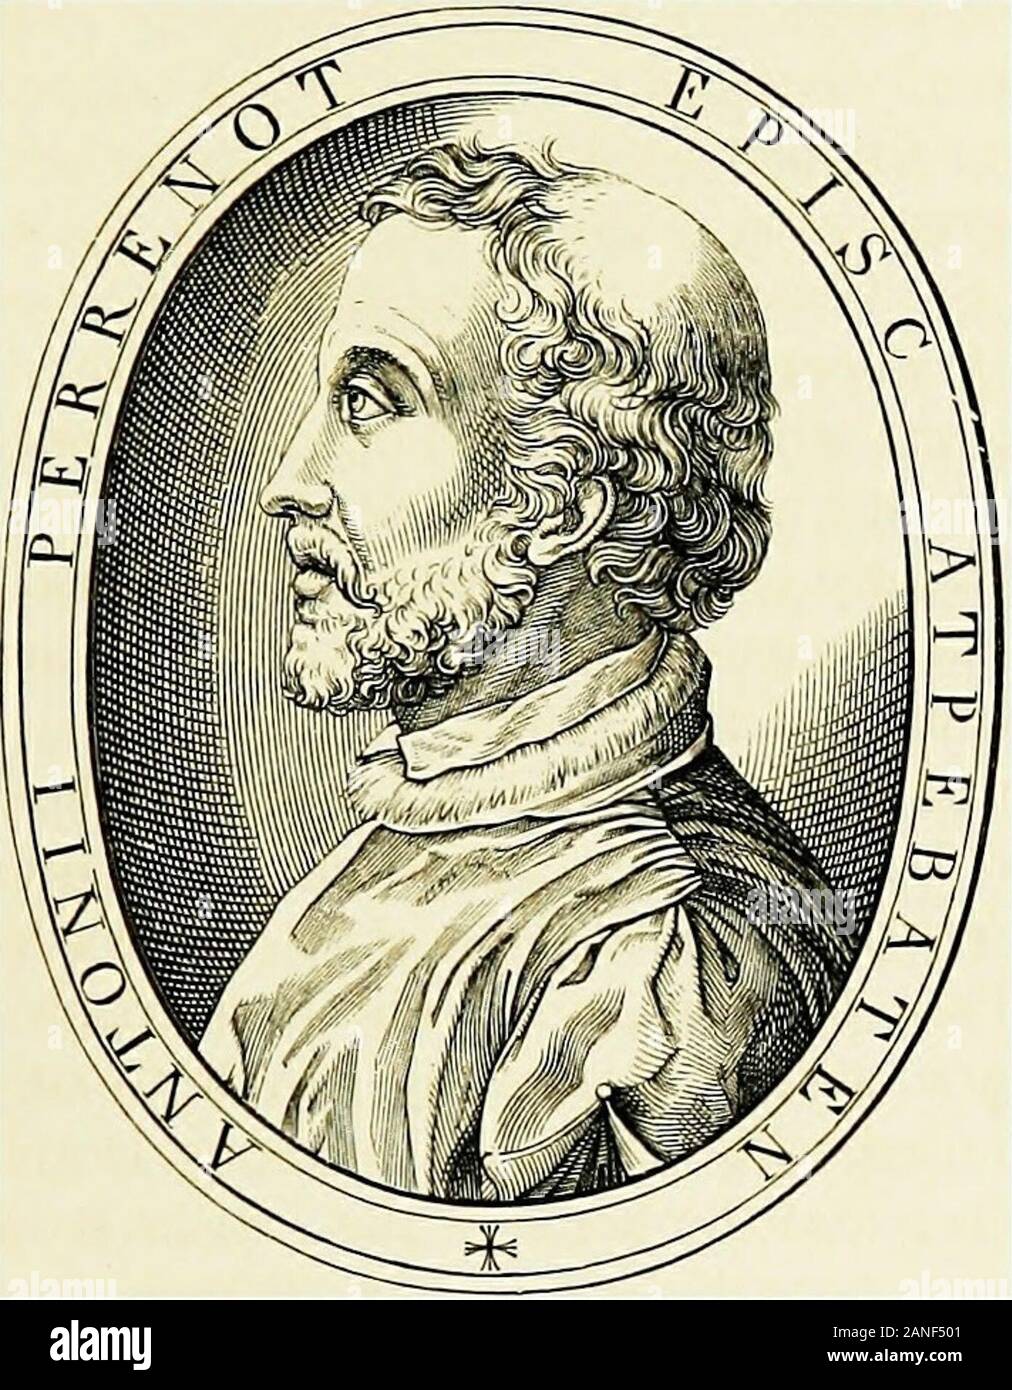 Don John of Austria, or Passages from the history of the sixteenth century, MDXLVIIMDLXXVII . s,which rendered the attempt, so far as that family was concerned,so alarming and so nearly successful, was mainly attributed to thearrogance of Giannetino Doria, the admirals nephew and heir, who &gt; Memoires de M. de la Rochefoucauld, Due de Dondcauville, vols, i.-vi., Paris, 1862,8vo, vol. i. Saturday Review, Nov. 8, 1862, p. 569. 2 A good notice of the Bank of St. George will be found in Botta : Storia dItalia,Parigi, 1832, 8vo, 10 vols., i. pp. 31-33. CHAP. II. SOJOURN IN NORTHERN ITALY. 35 fell Stock Photo